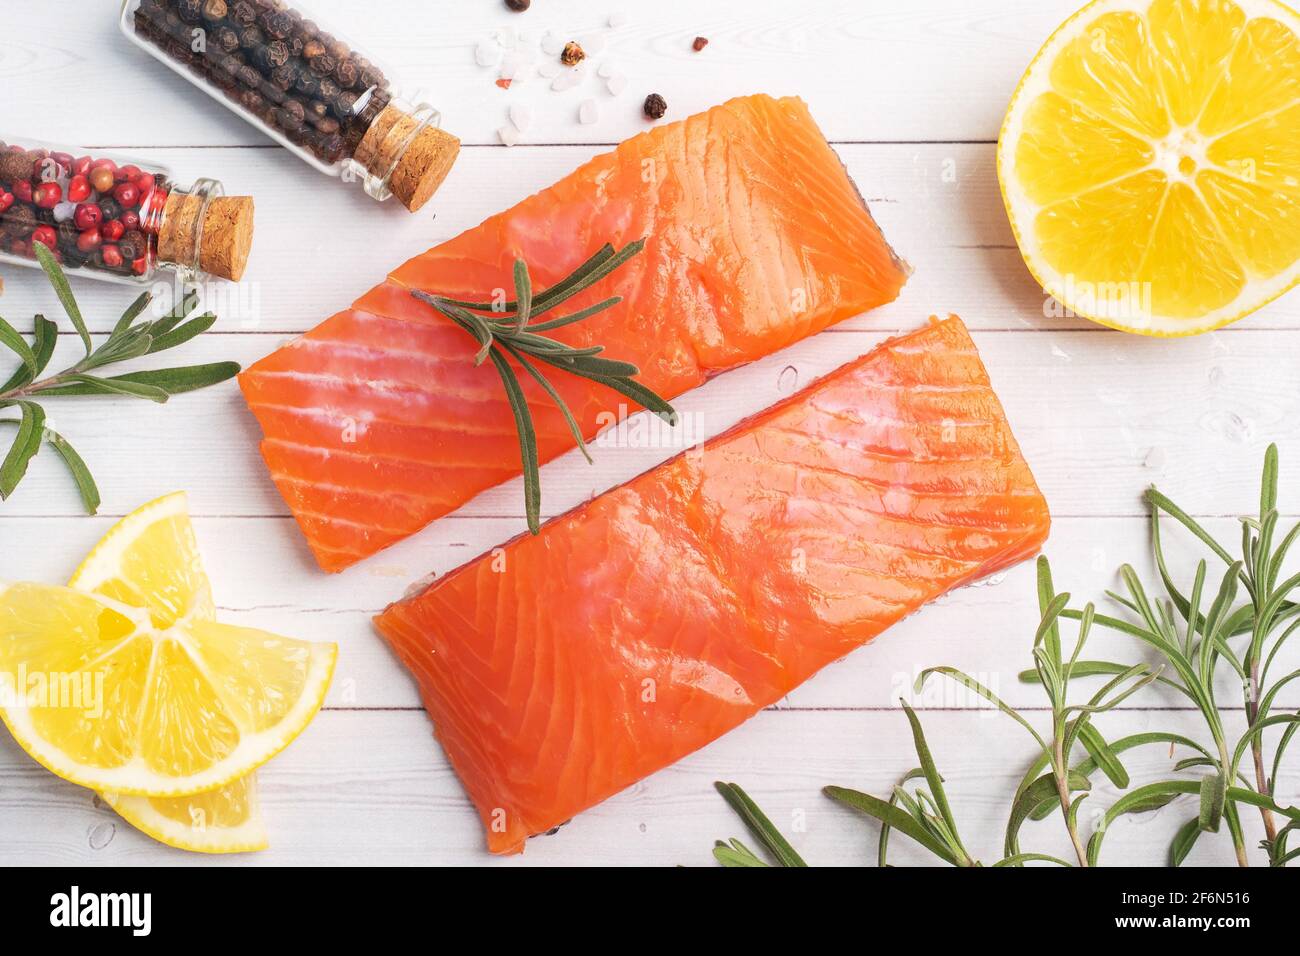 Salmon fillet, red salted fish on a white table. Lemon, rosemary spices Copy space. Stock Photo